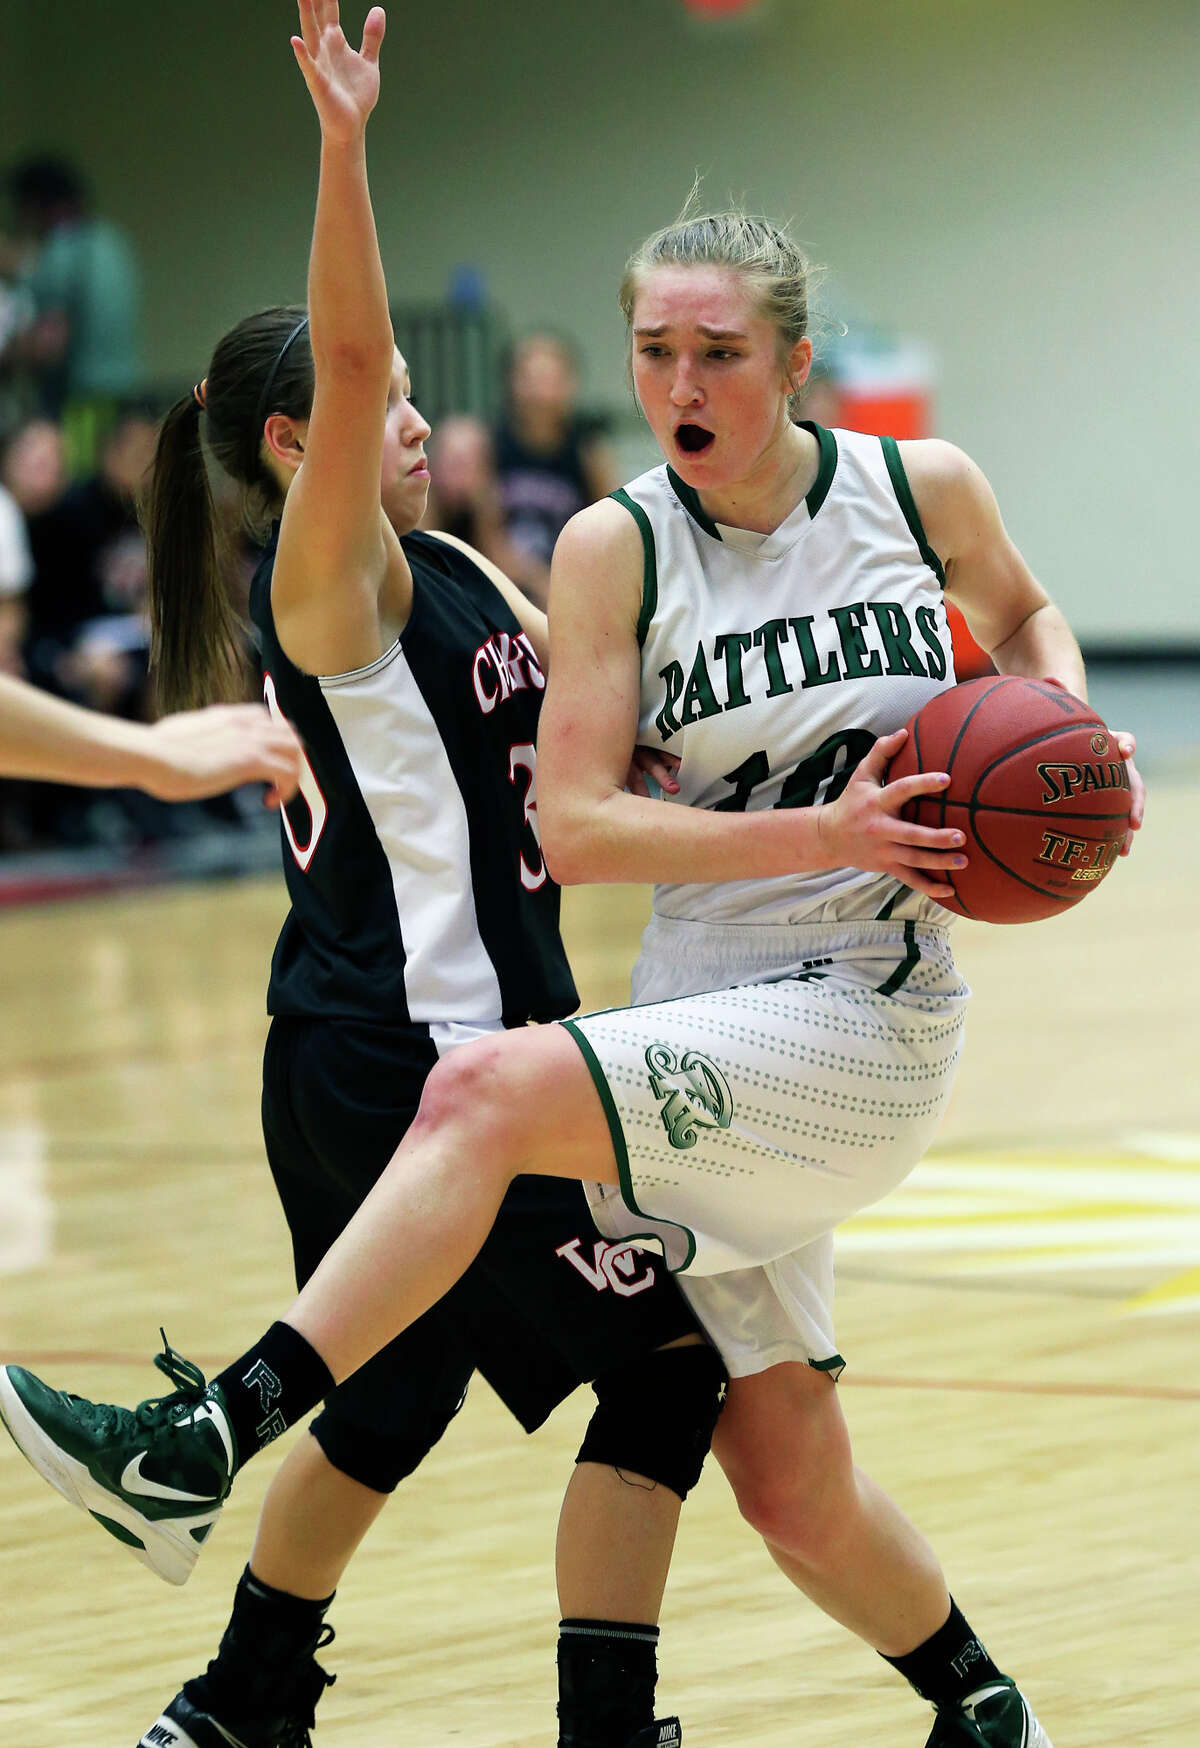 Wendy Knight tugs away a pass for the Rattlers as the Reagan girls play Churchill at Littleton Gym on January 15, 2013.